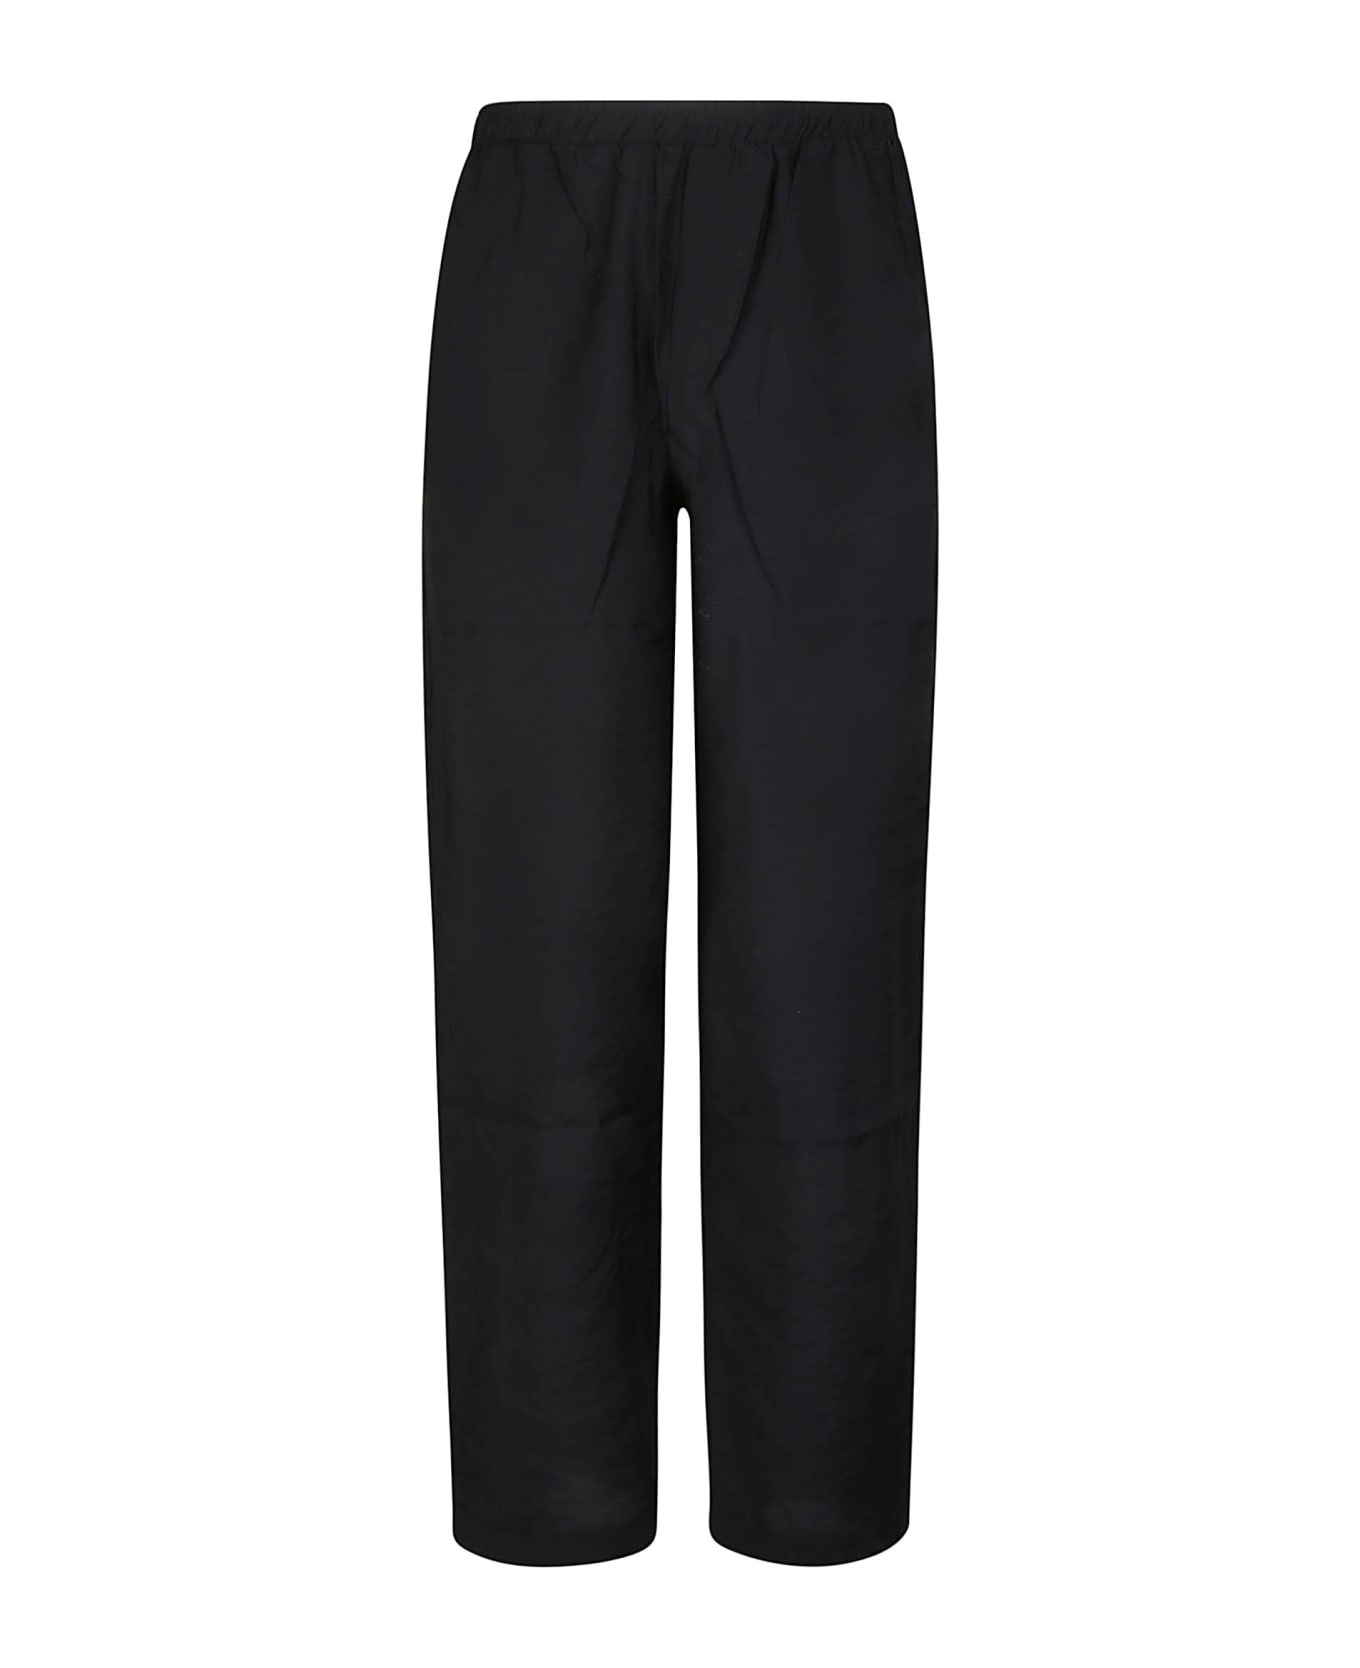 Family First Milano Soft Cupro Pant - Black